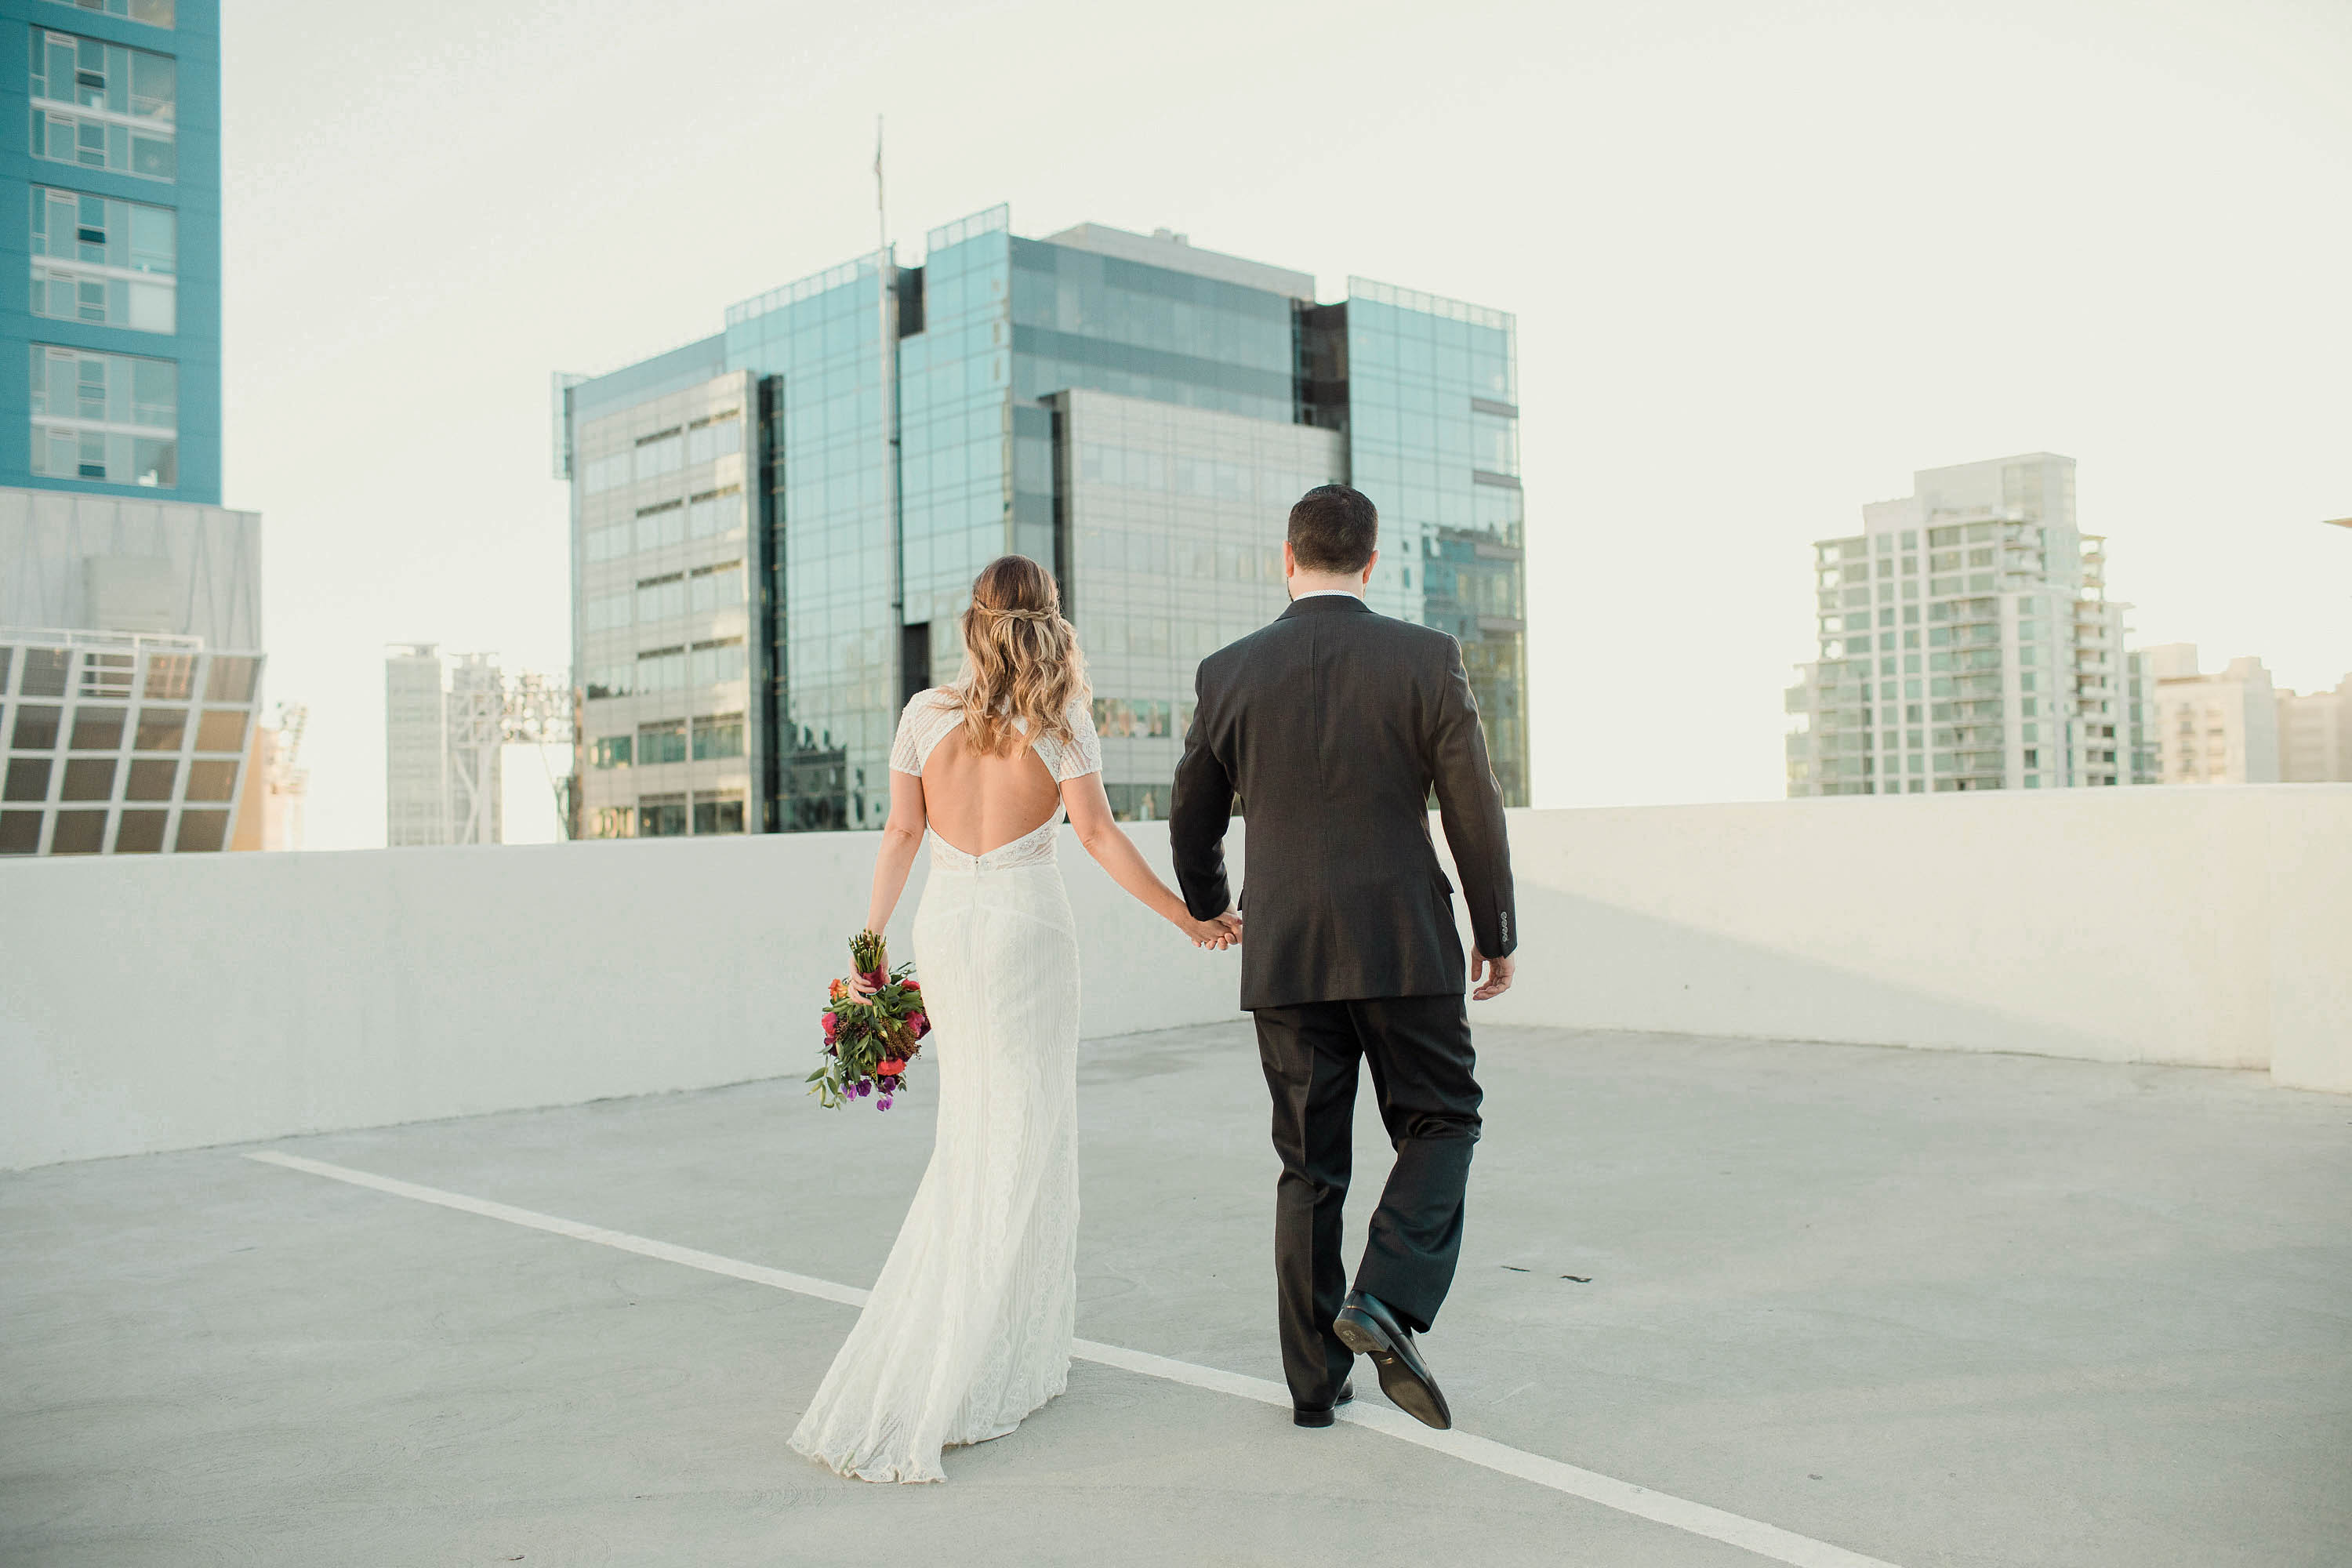 Why I Waited Until My 30s To Get Married